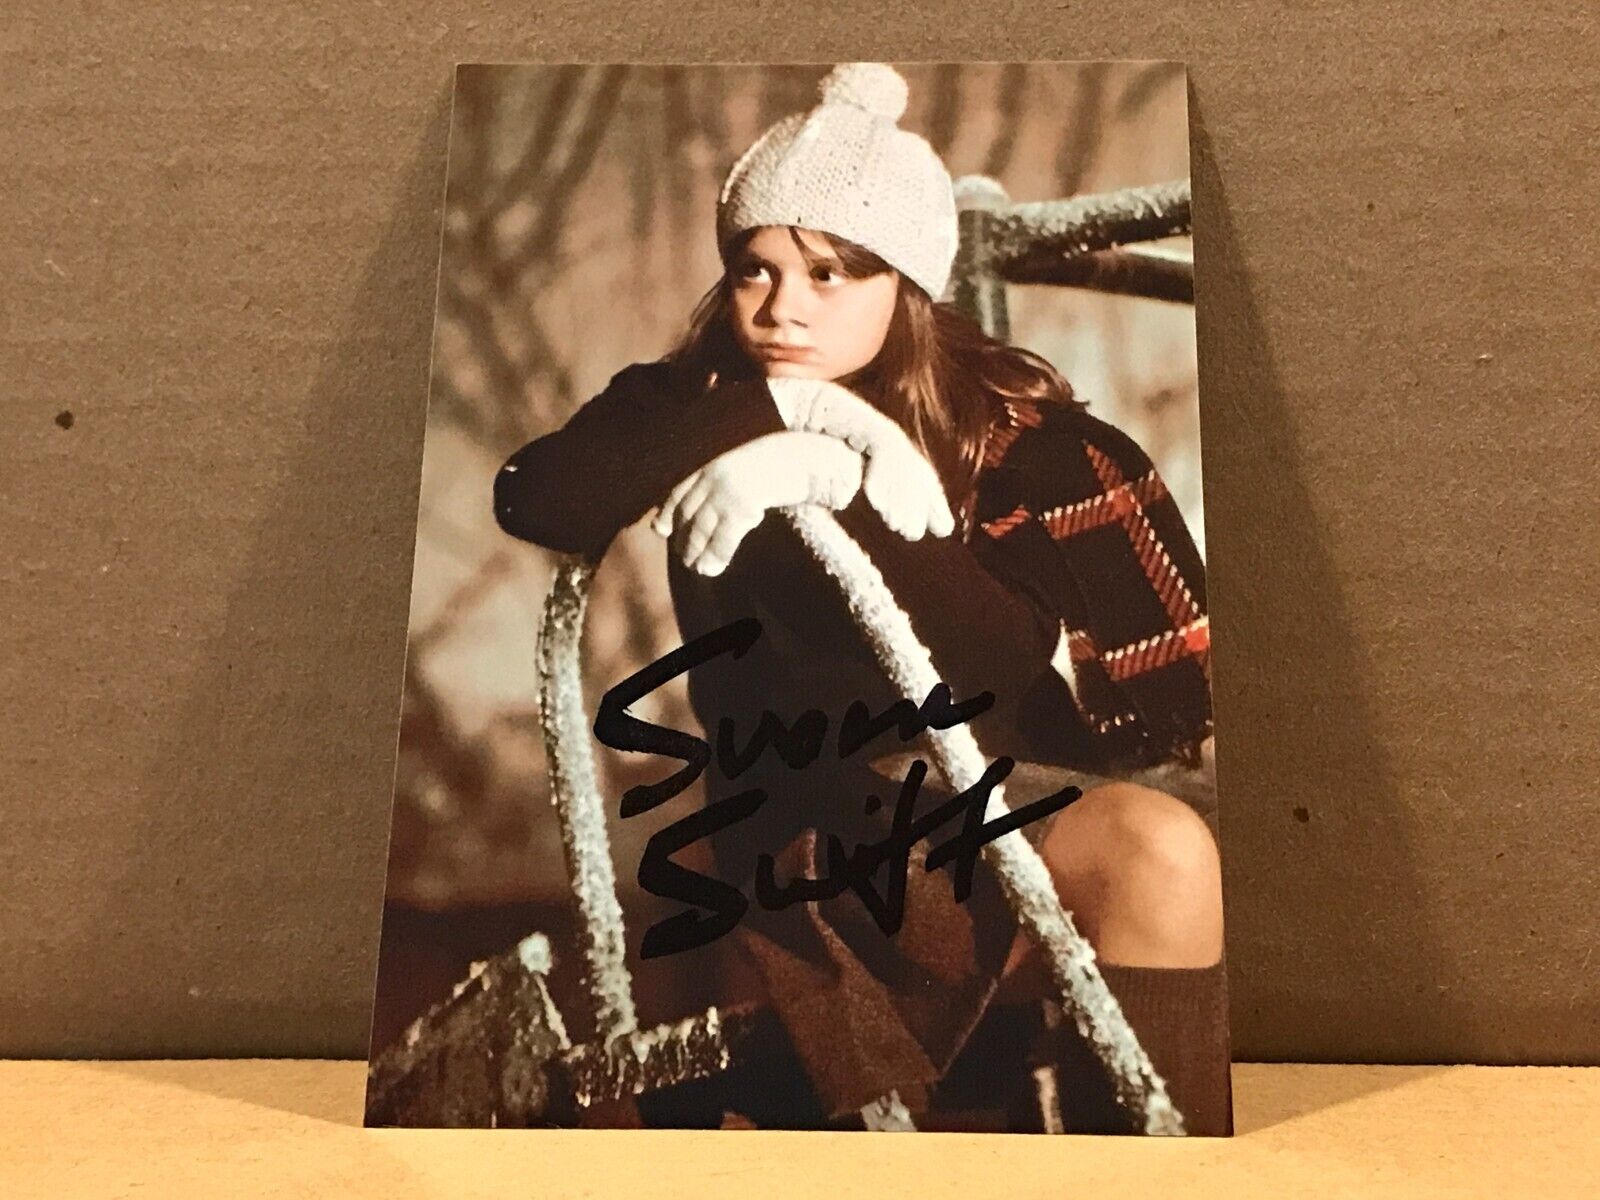 SUSAN SWIFT Authentic Hand Signed Autograph 4x6 Photo - ACTRESS / HALLOWEEN 6